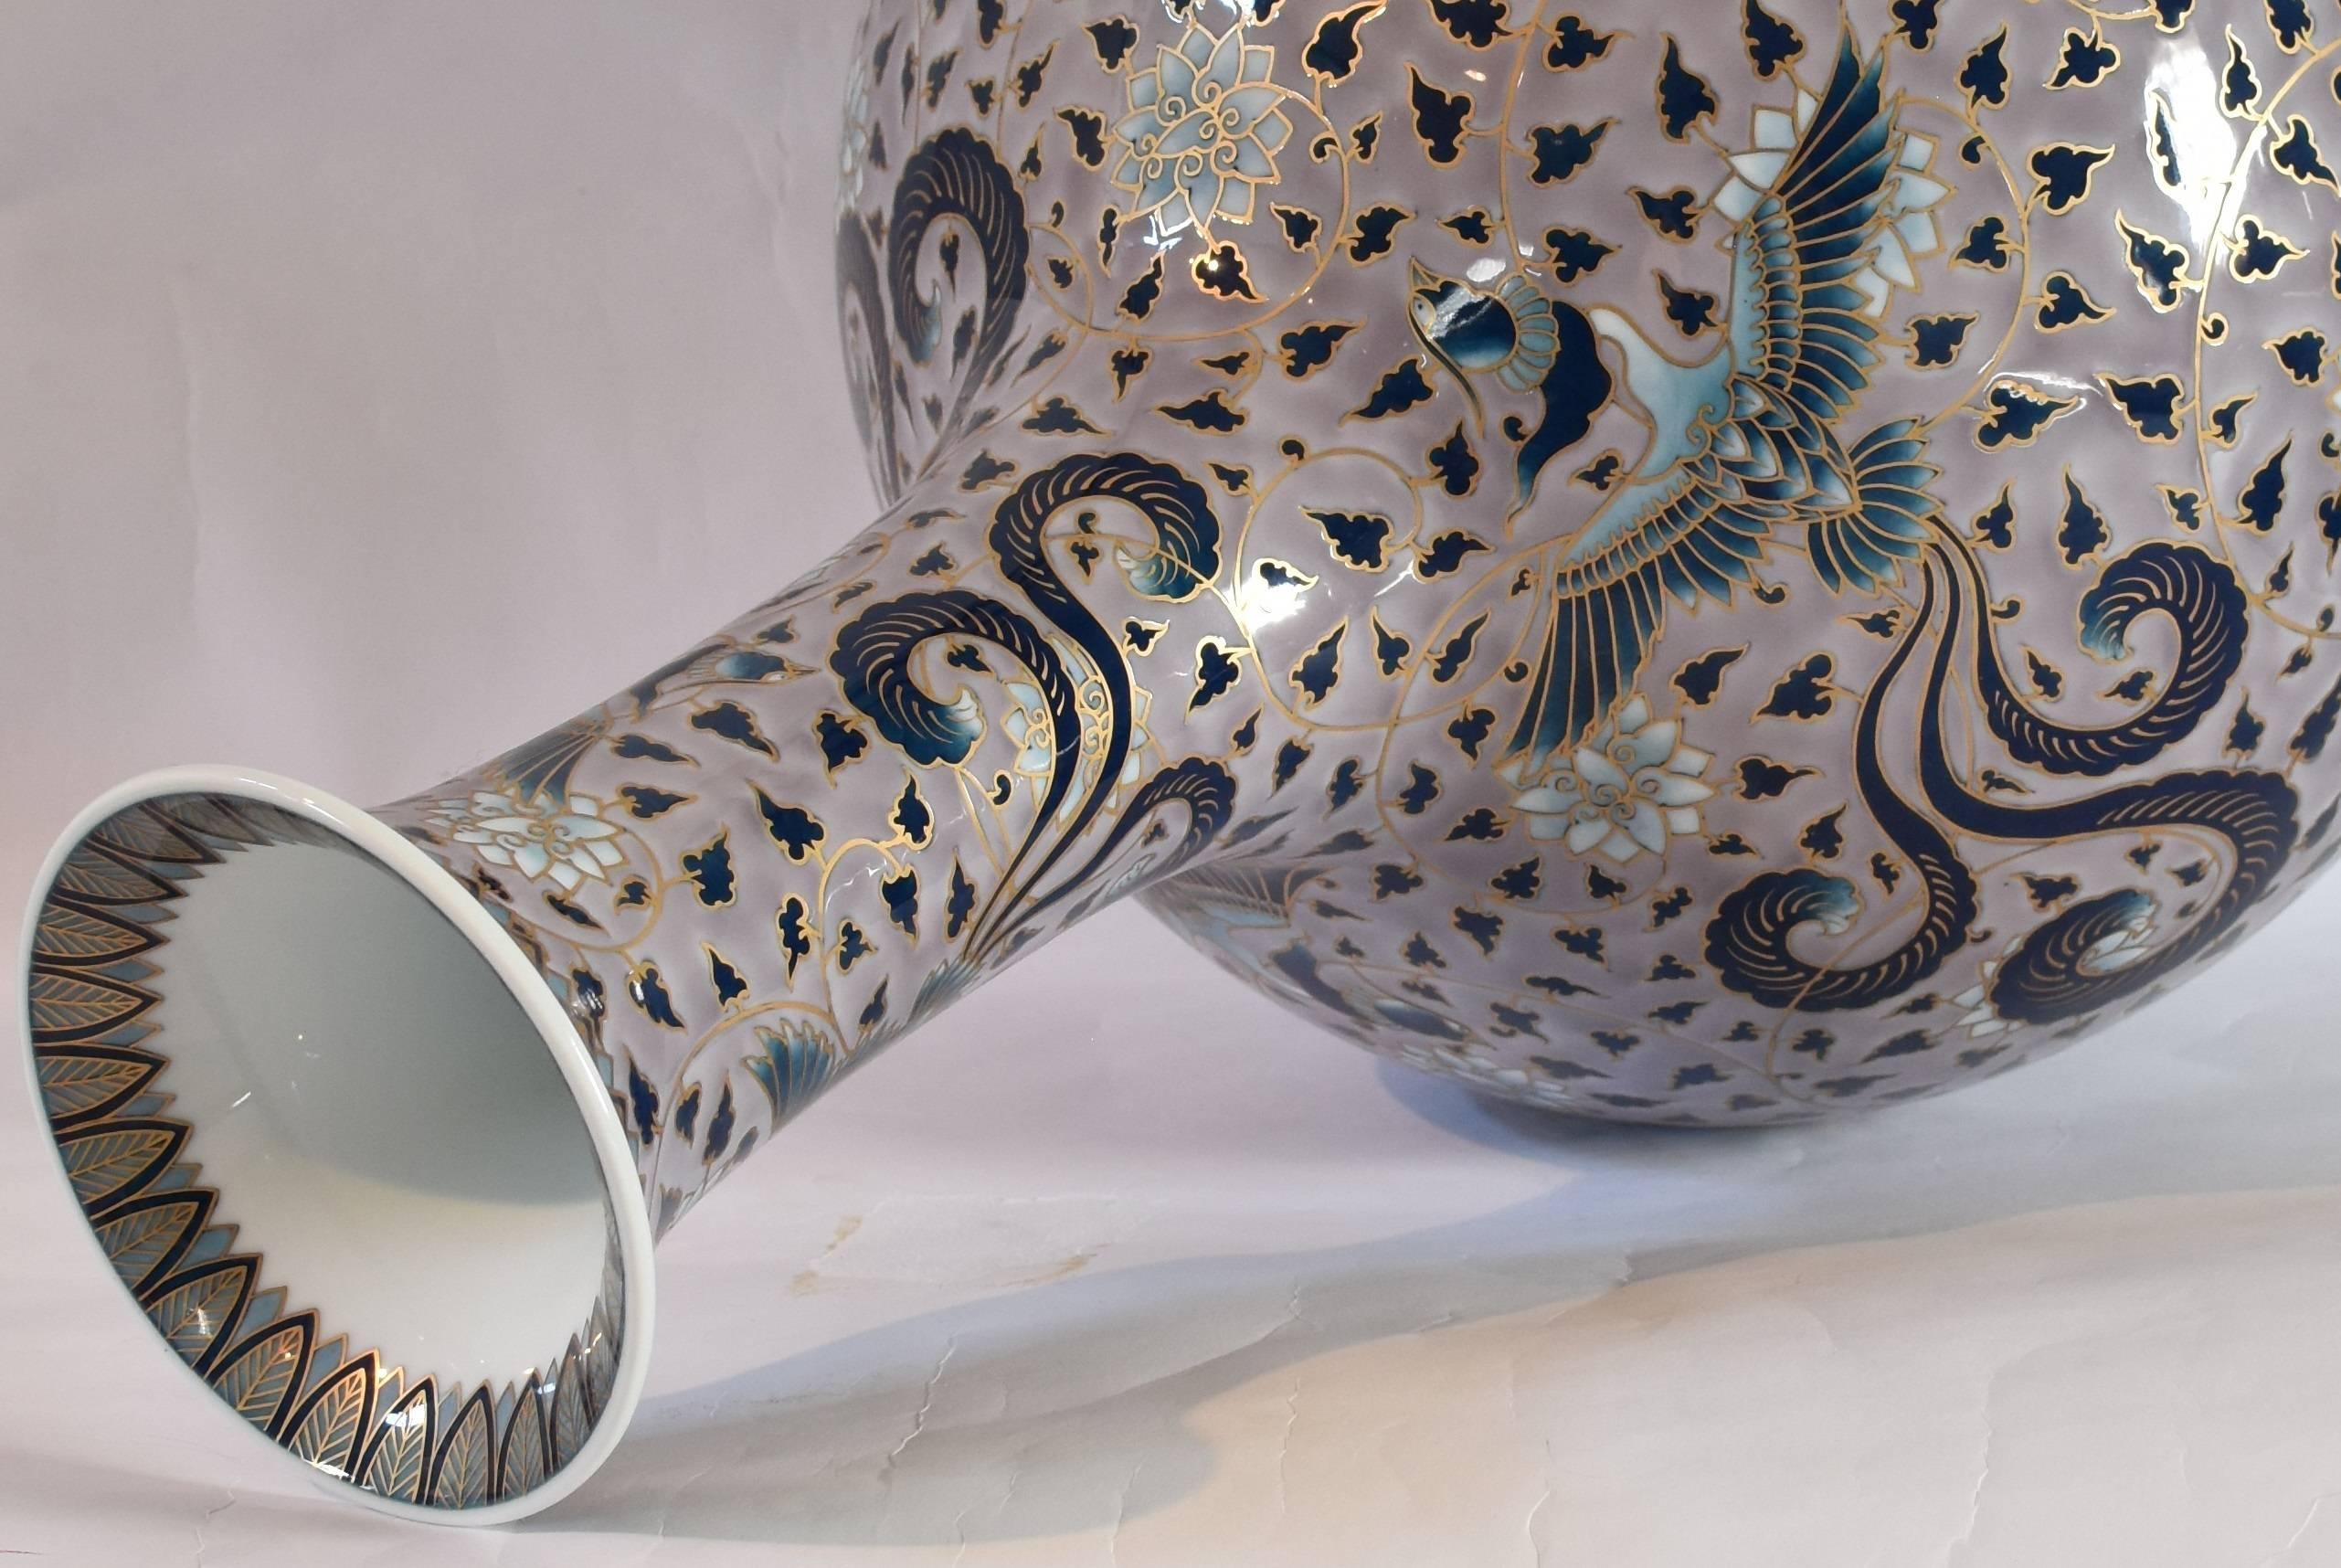 Extraordinary massive contemporary Japanese porcelain vase, extraorinarily intricately gilded and hand painted on Porcelain in a stunning shape in purple-grey, a signed masterpiece by highly acclaimed and award-winning master porcelain artist in